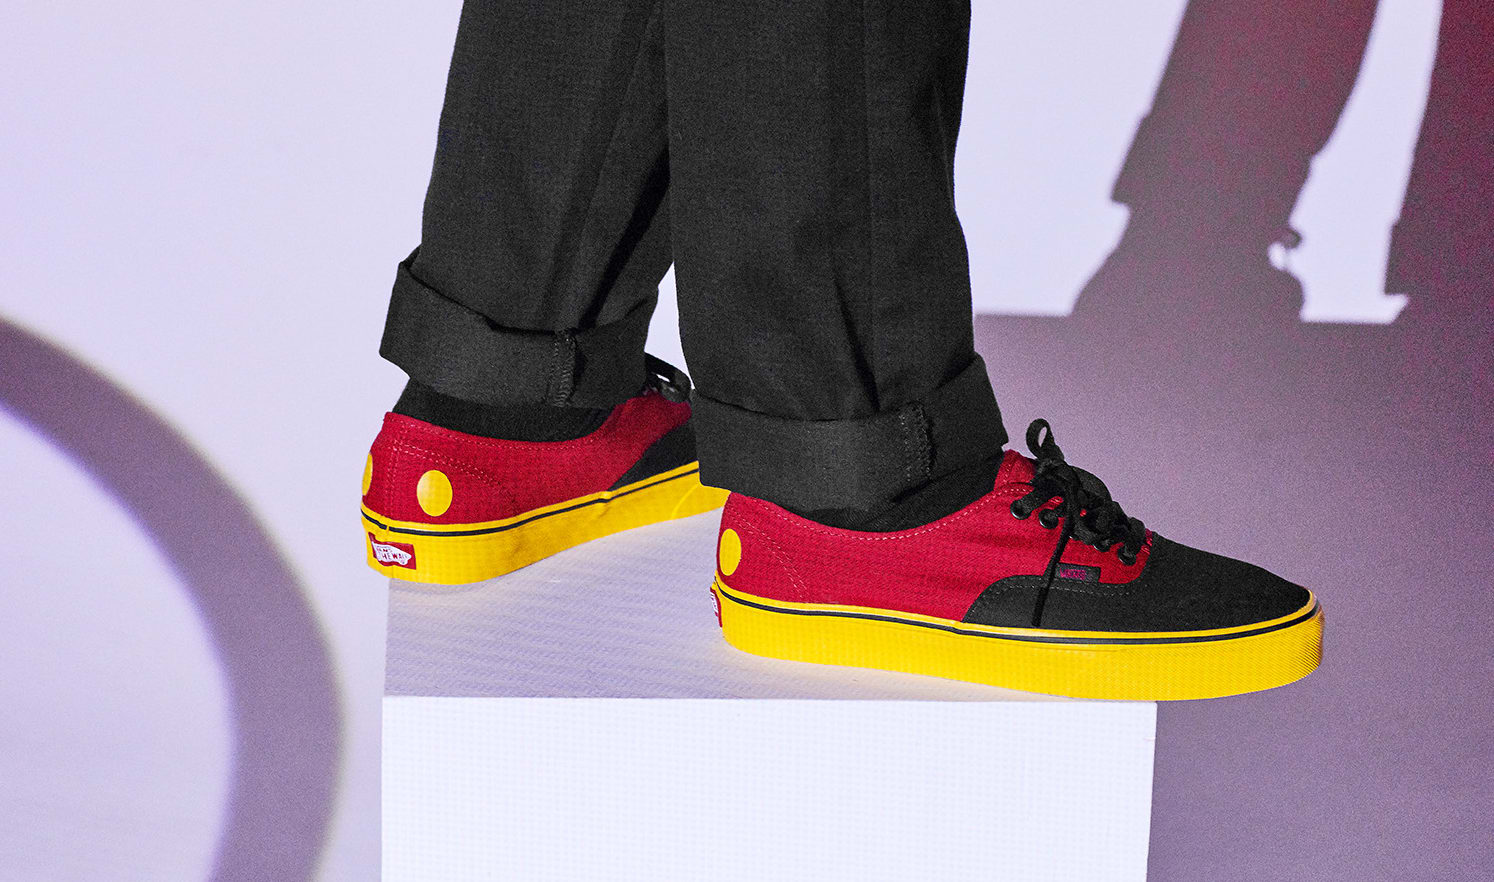 Disney & Vans Reveal New Mickey Mouse-Inspired Capsule | Fashion News - Conversations ...1494 x 882